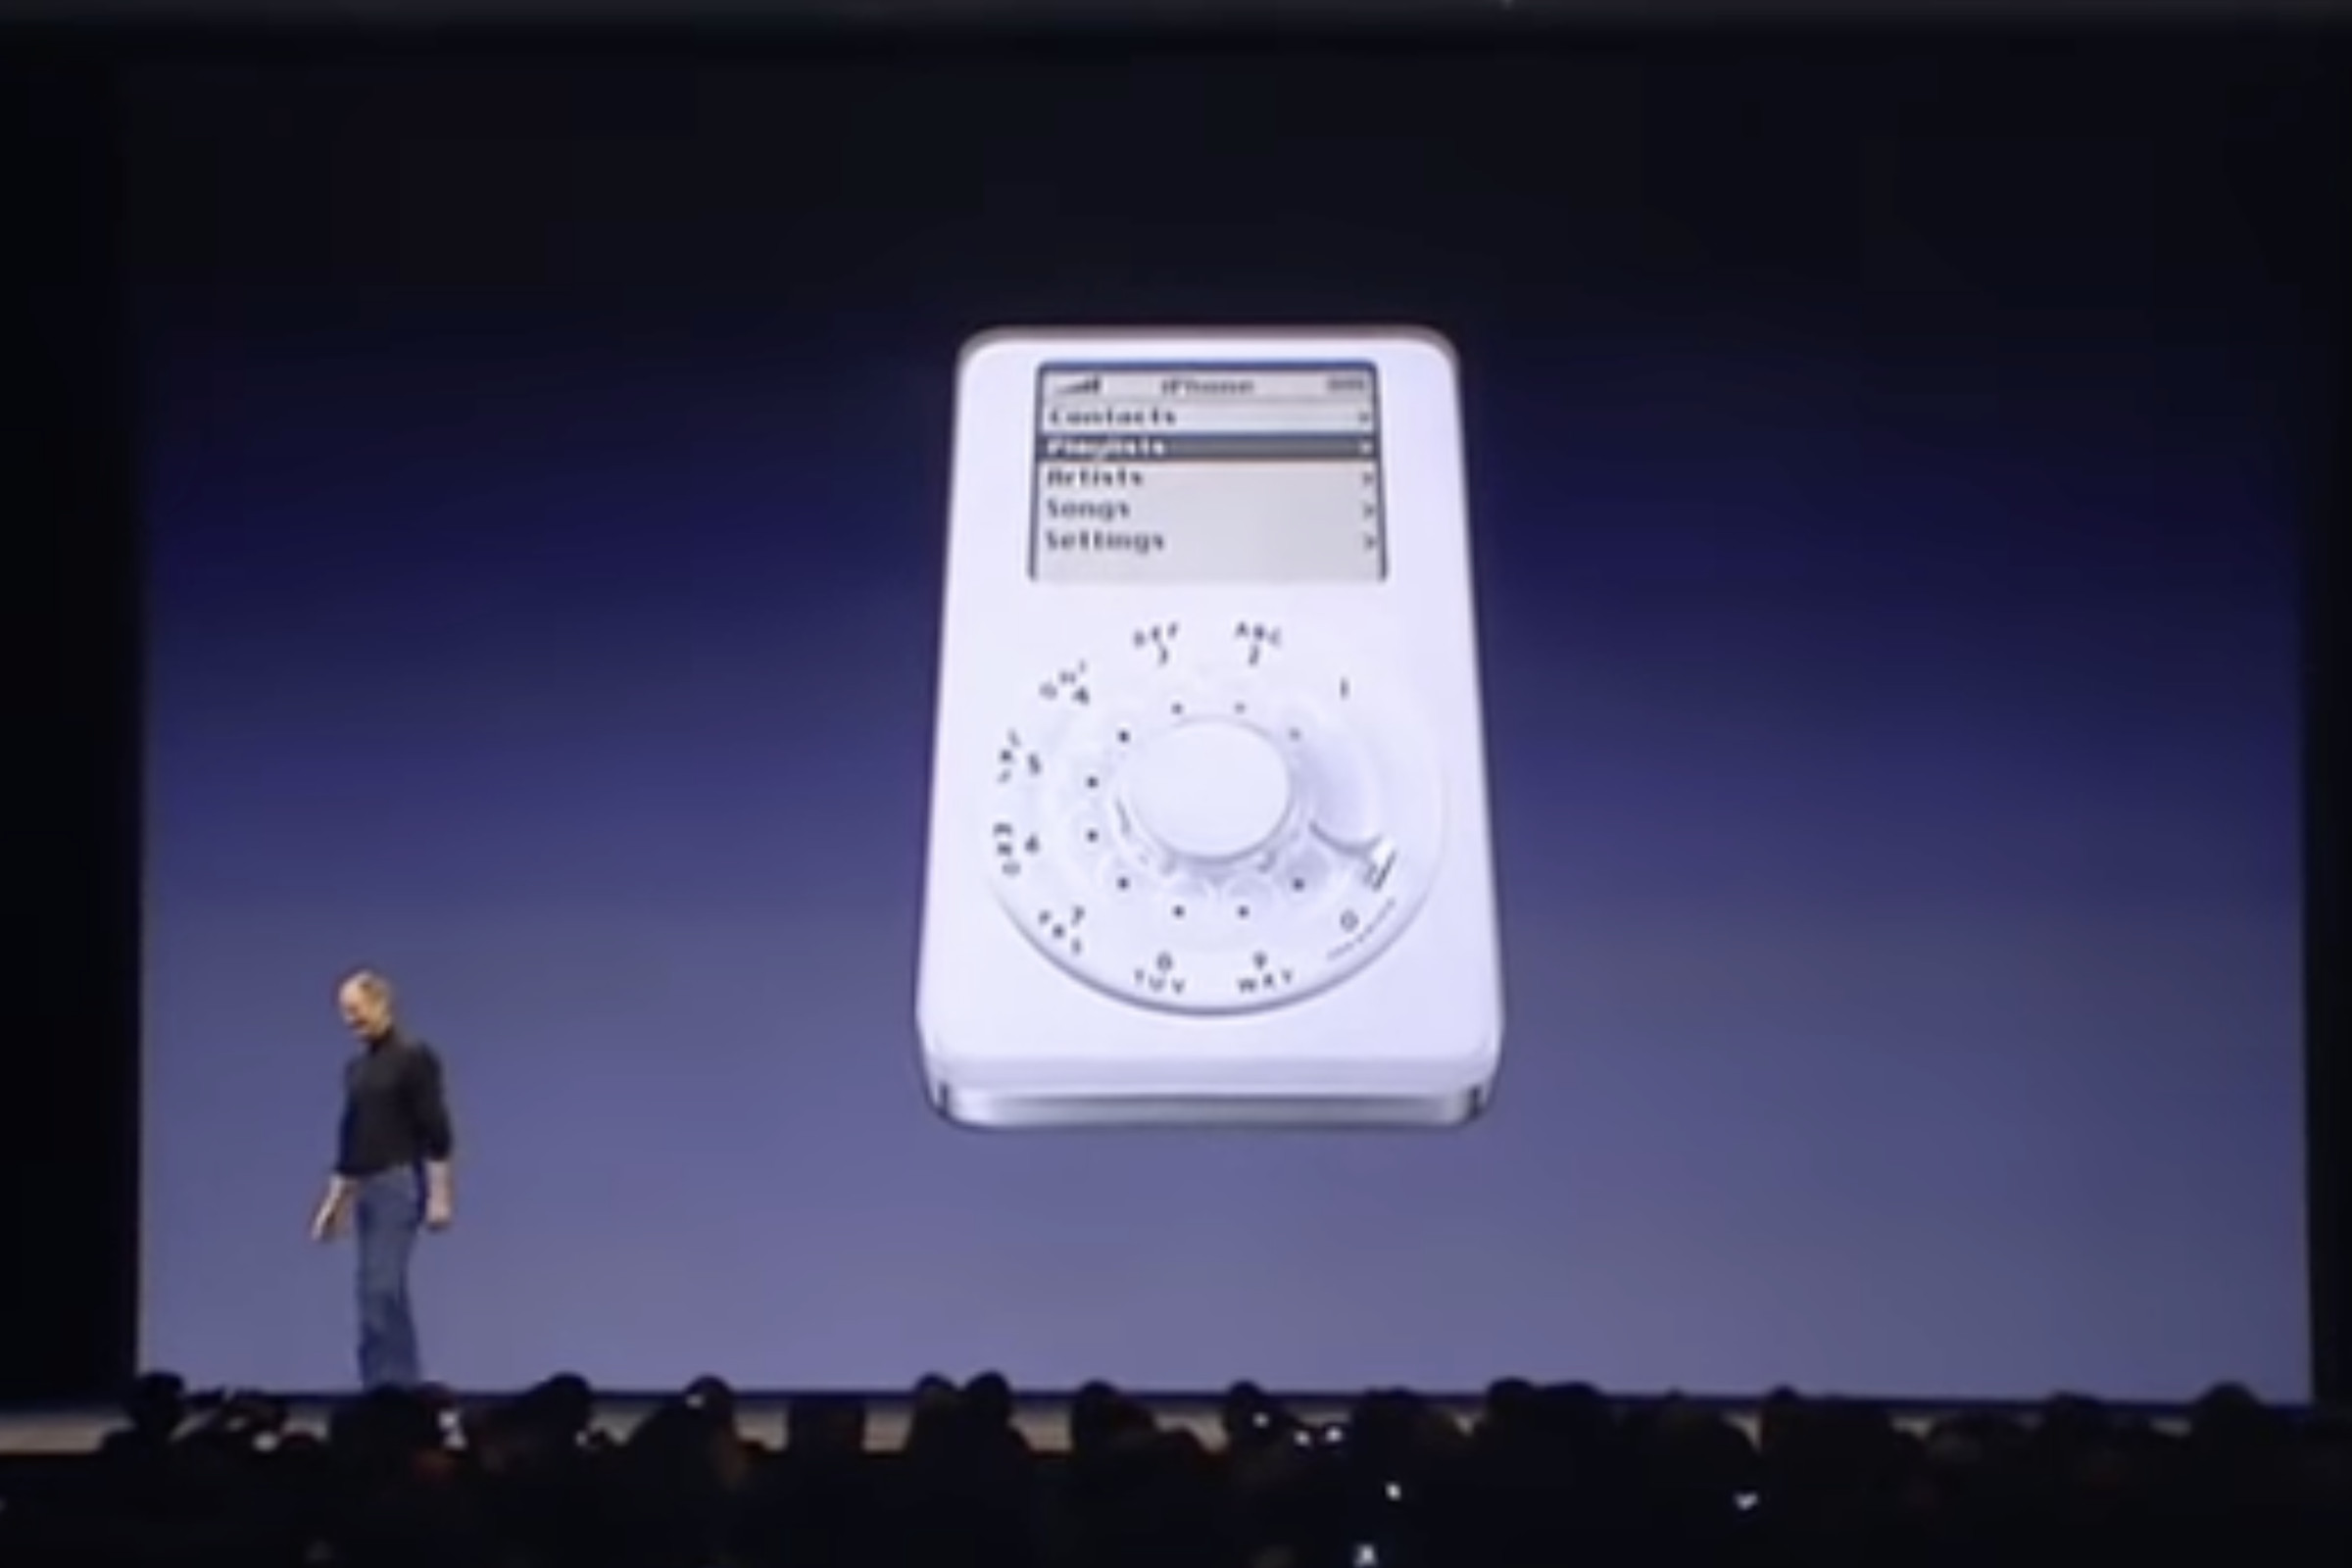 When announcing the iPhone, Steve Jobs joked about it looking like an iPod with a rotary dial.